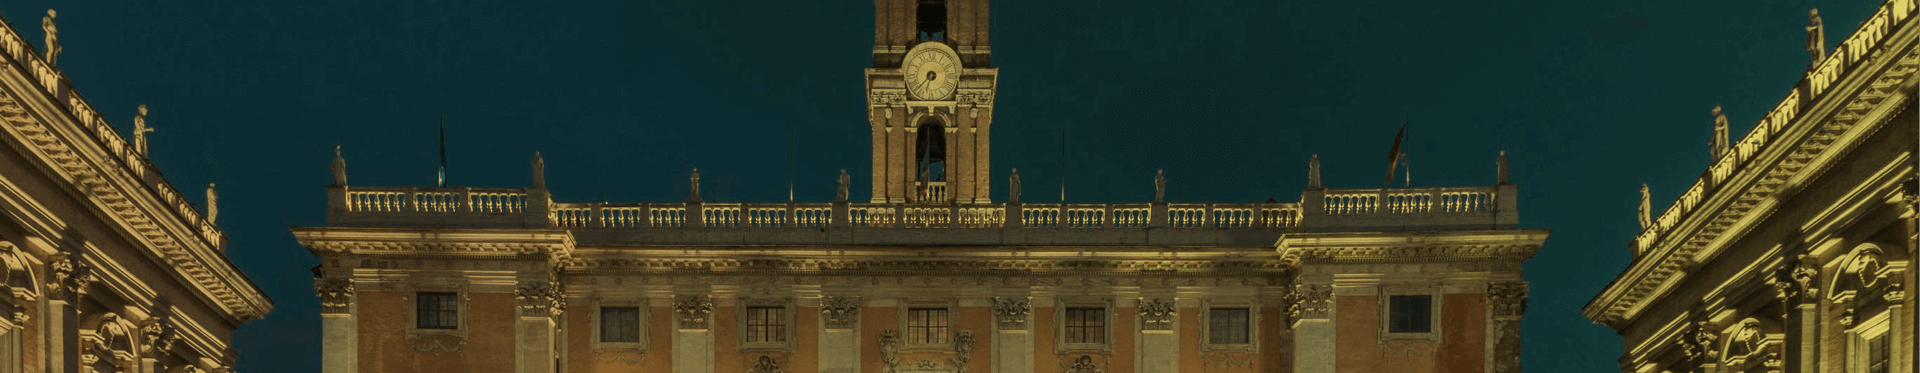 Acea LED lighting for the Capitoline Hill